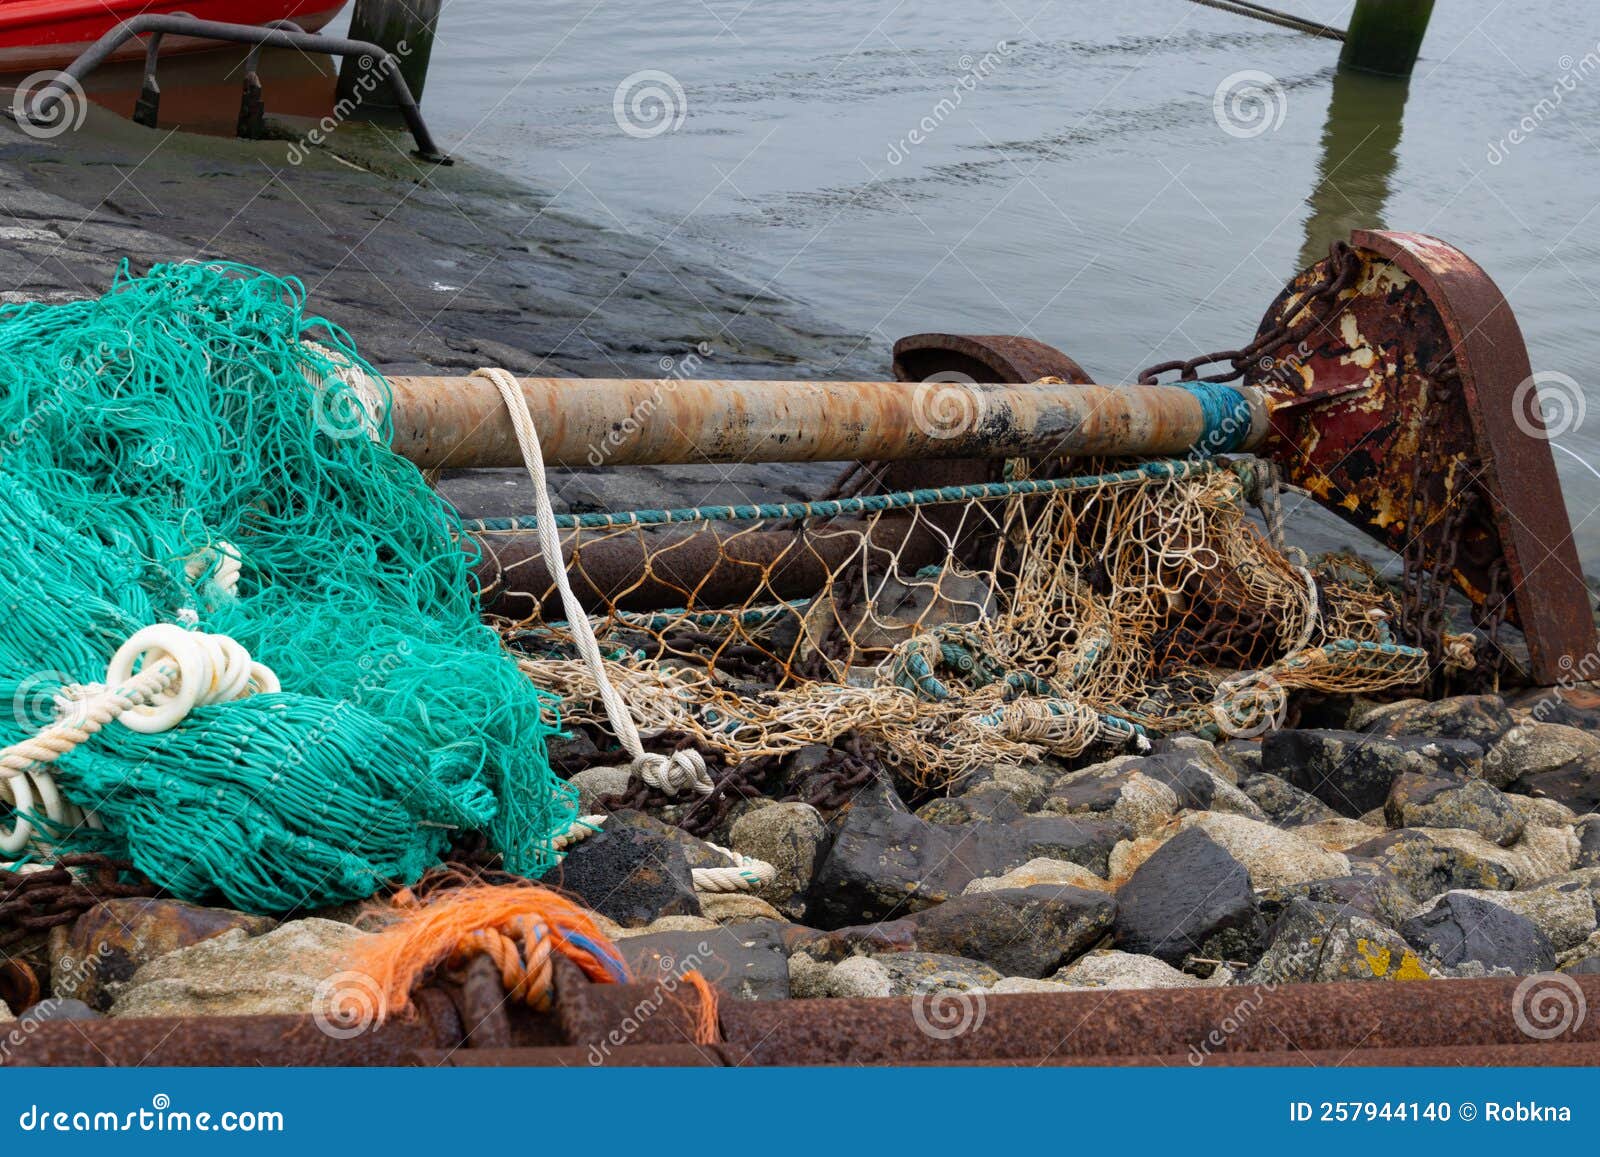 Dirty Old Fishing Net on the Dock Stock Photo - Image of pile